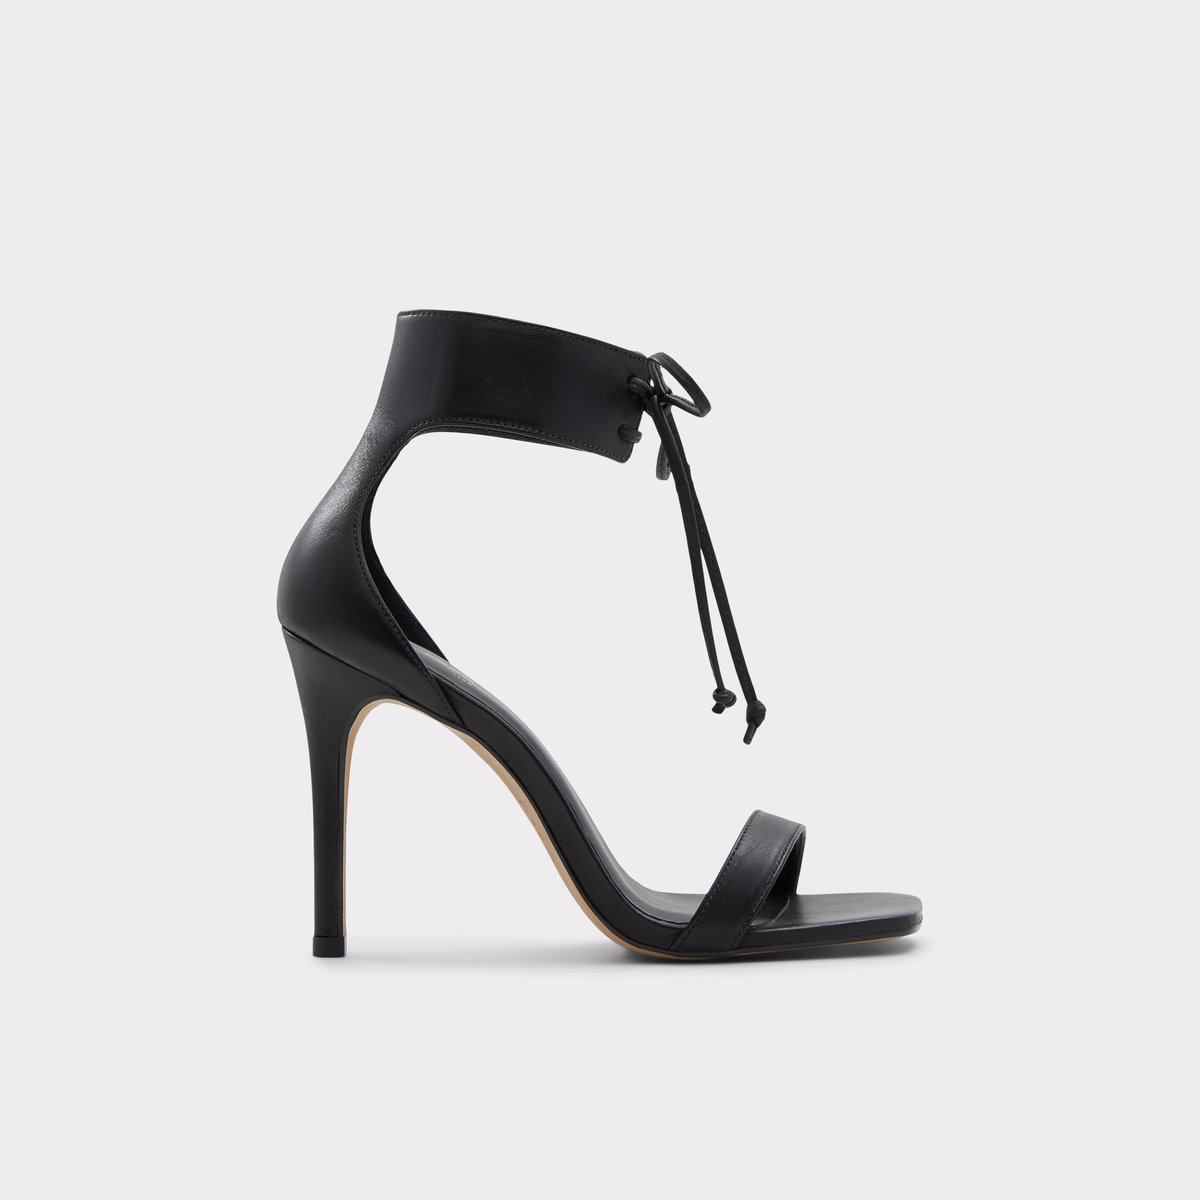 Dreamyy Black Suede Square Toe Ankle Strap High Heel Sandals